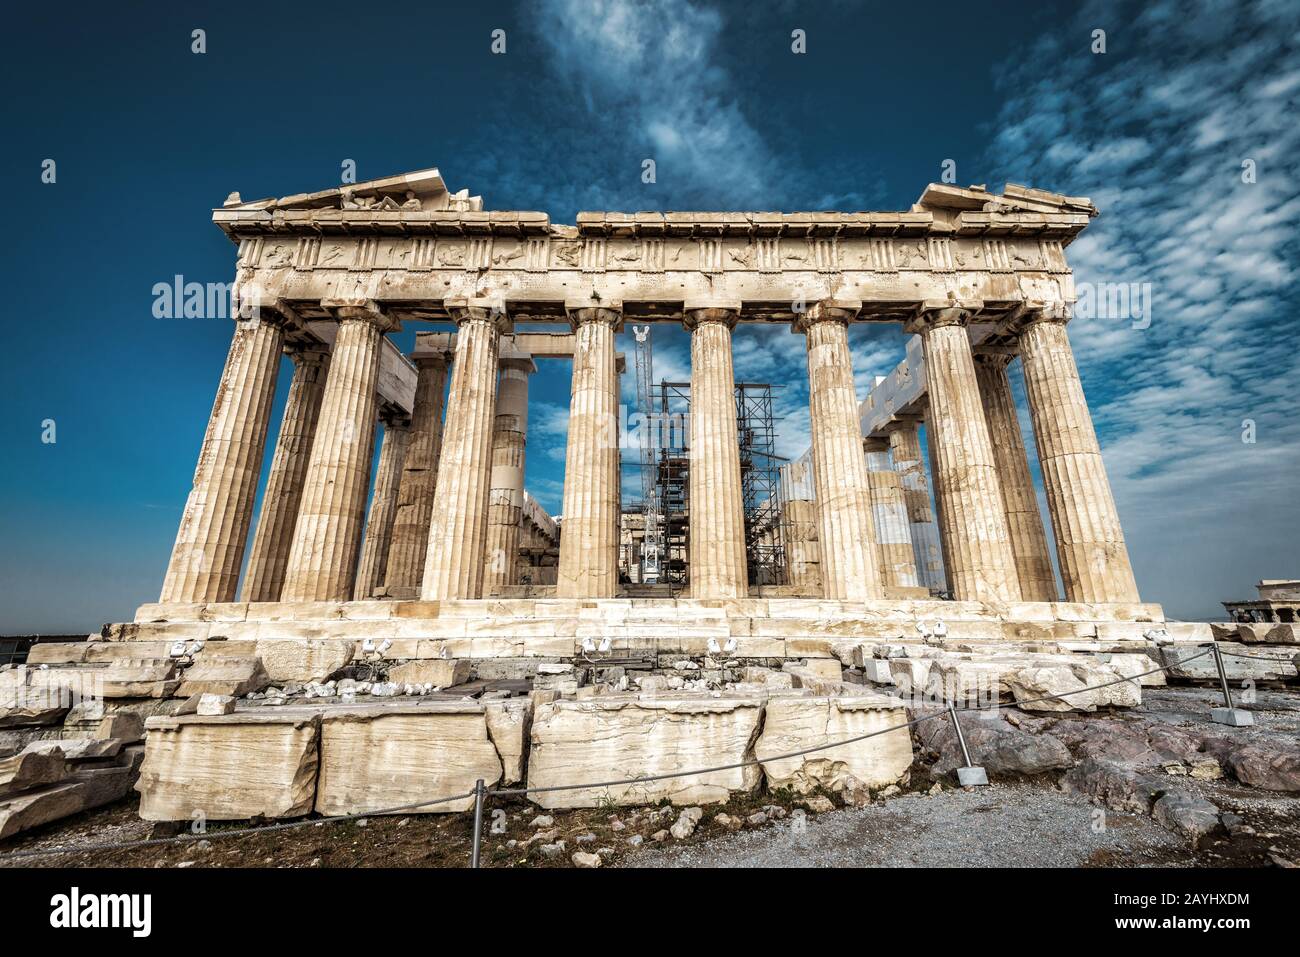 Parthenon on the Acropolis of Athens, Greece. This ancient Greek temple is a main landmark of Athens. Nice view of Parthenon ruins at the top of hill. Stock Photo